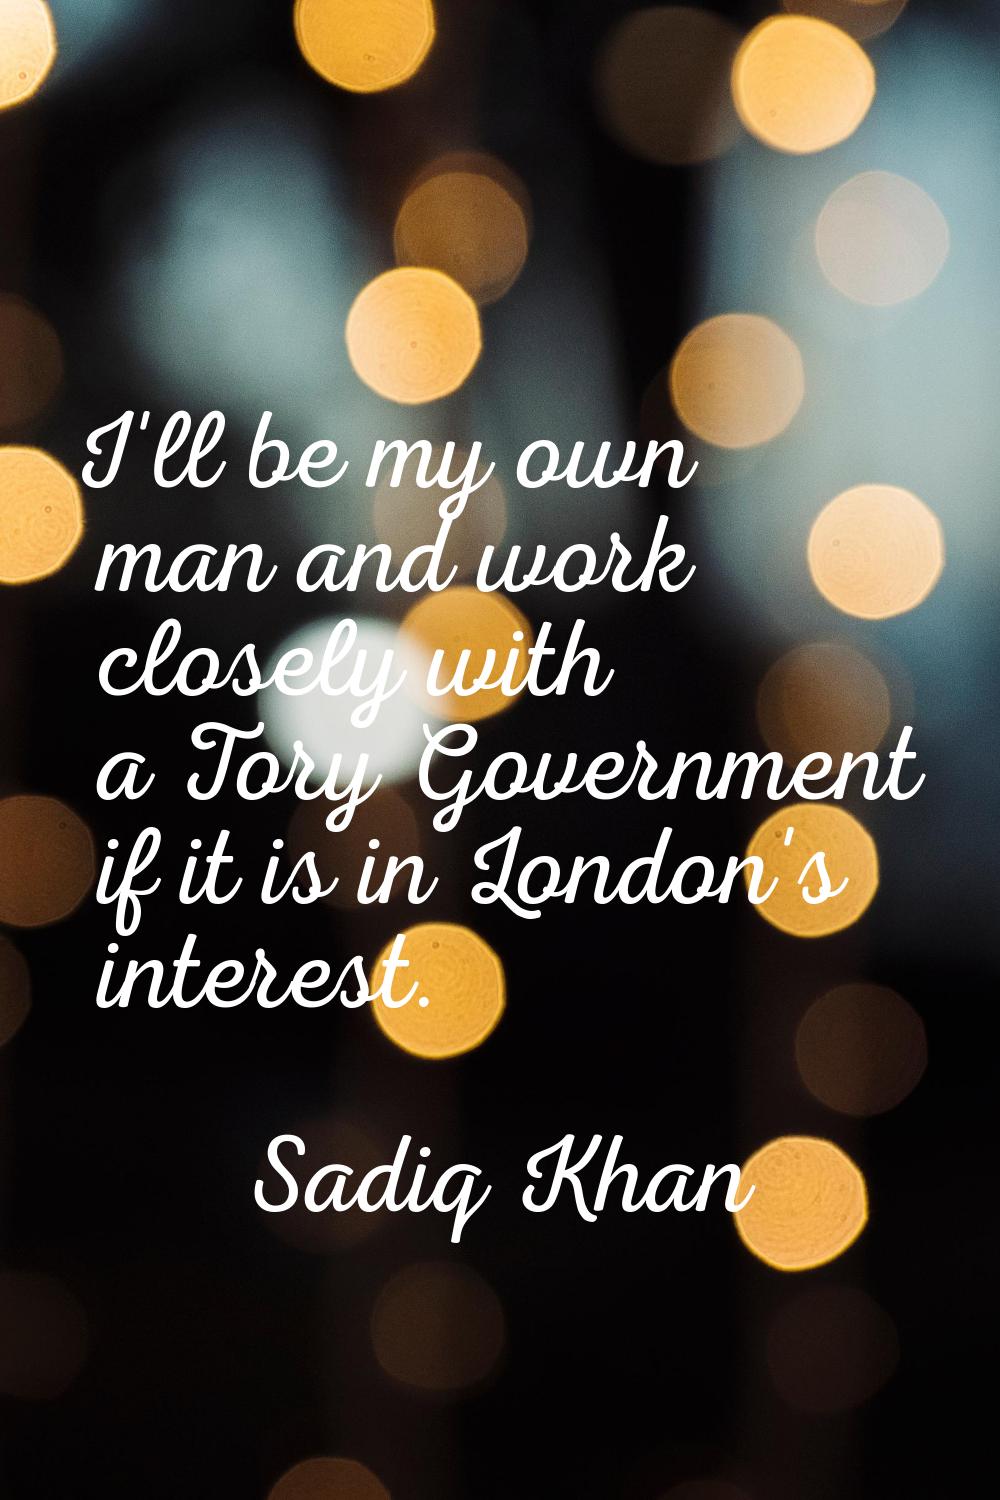 I'll be my own man and work closely with a Tory Government if it is in London's interest.